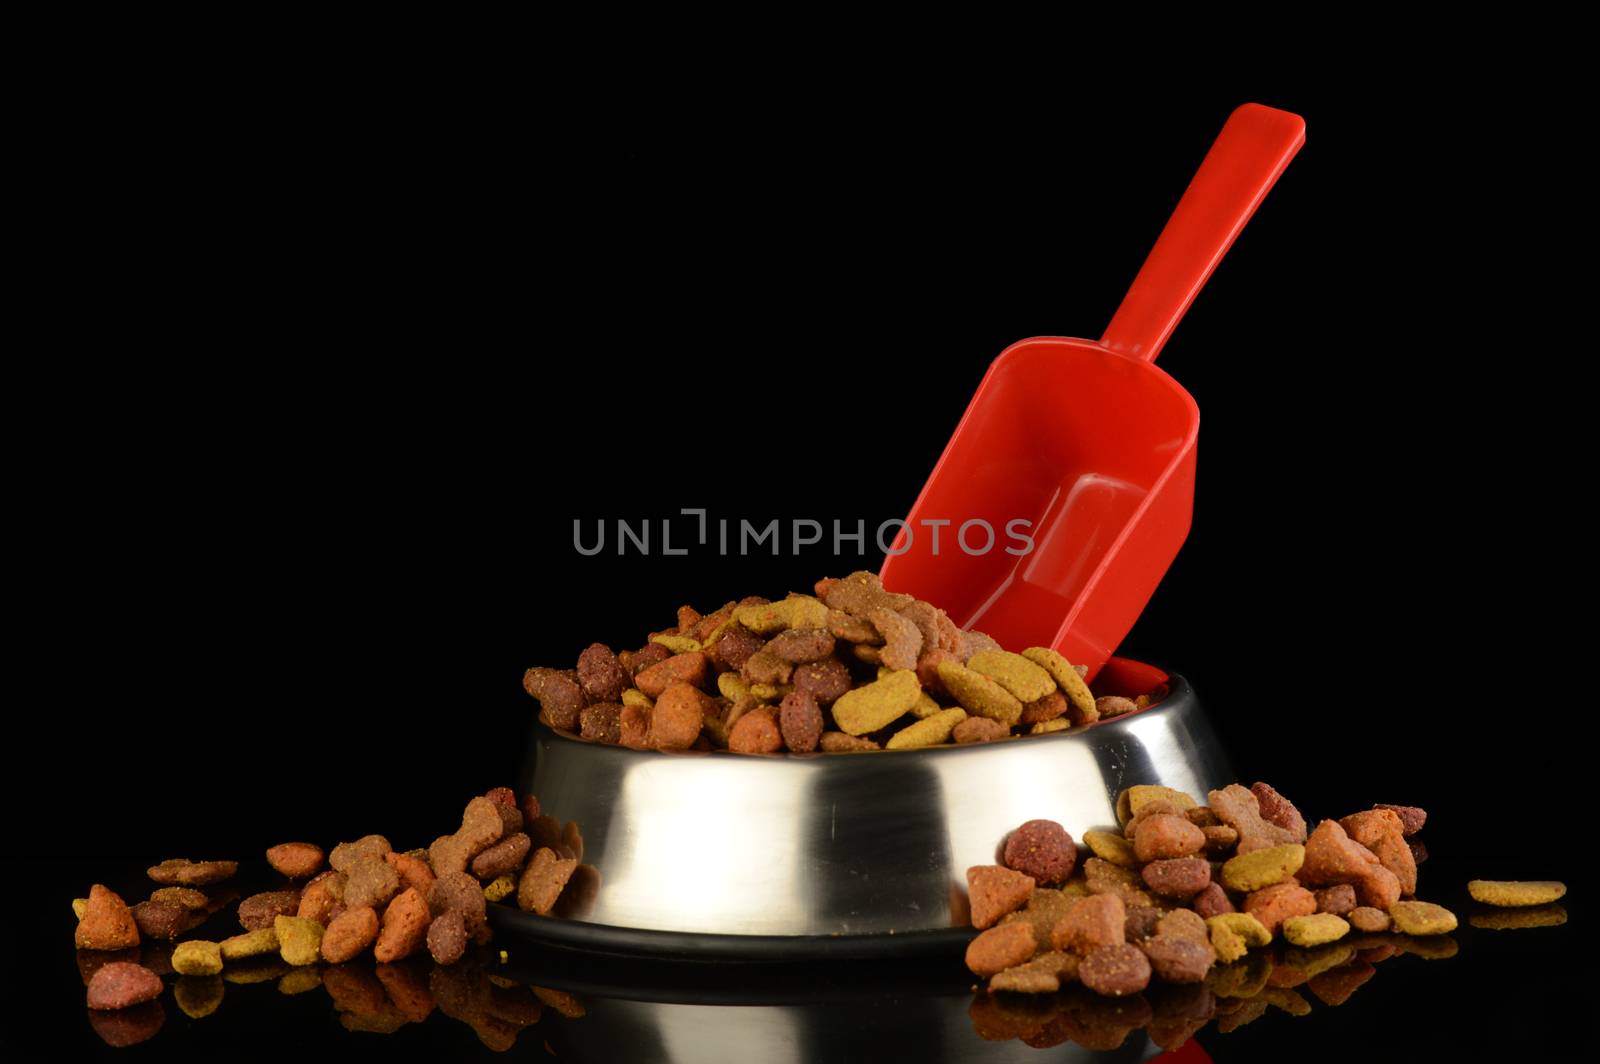 A red scoop filling a chrome dog dish full of food for the beloved pet.